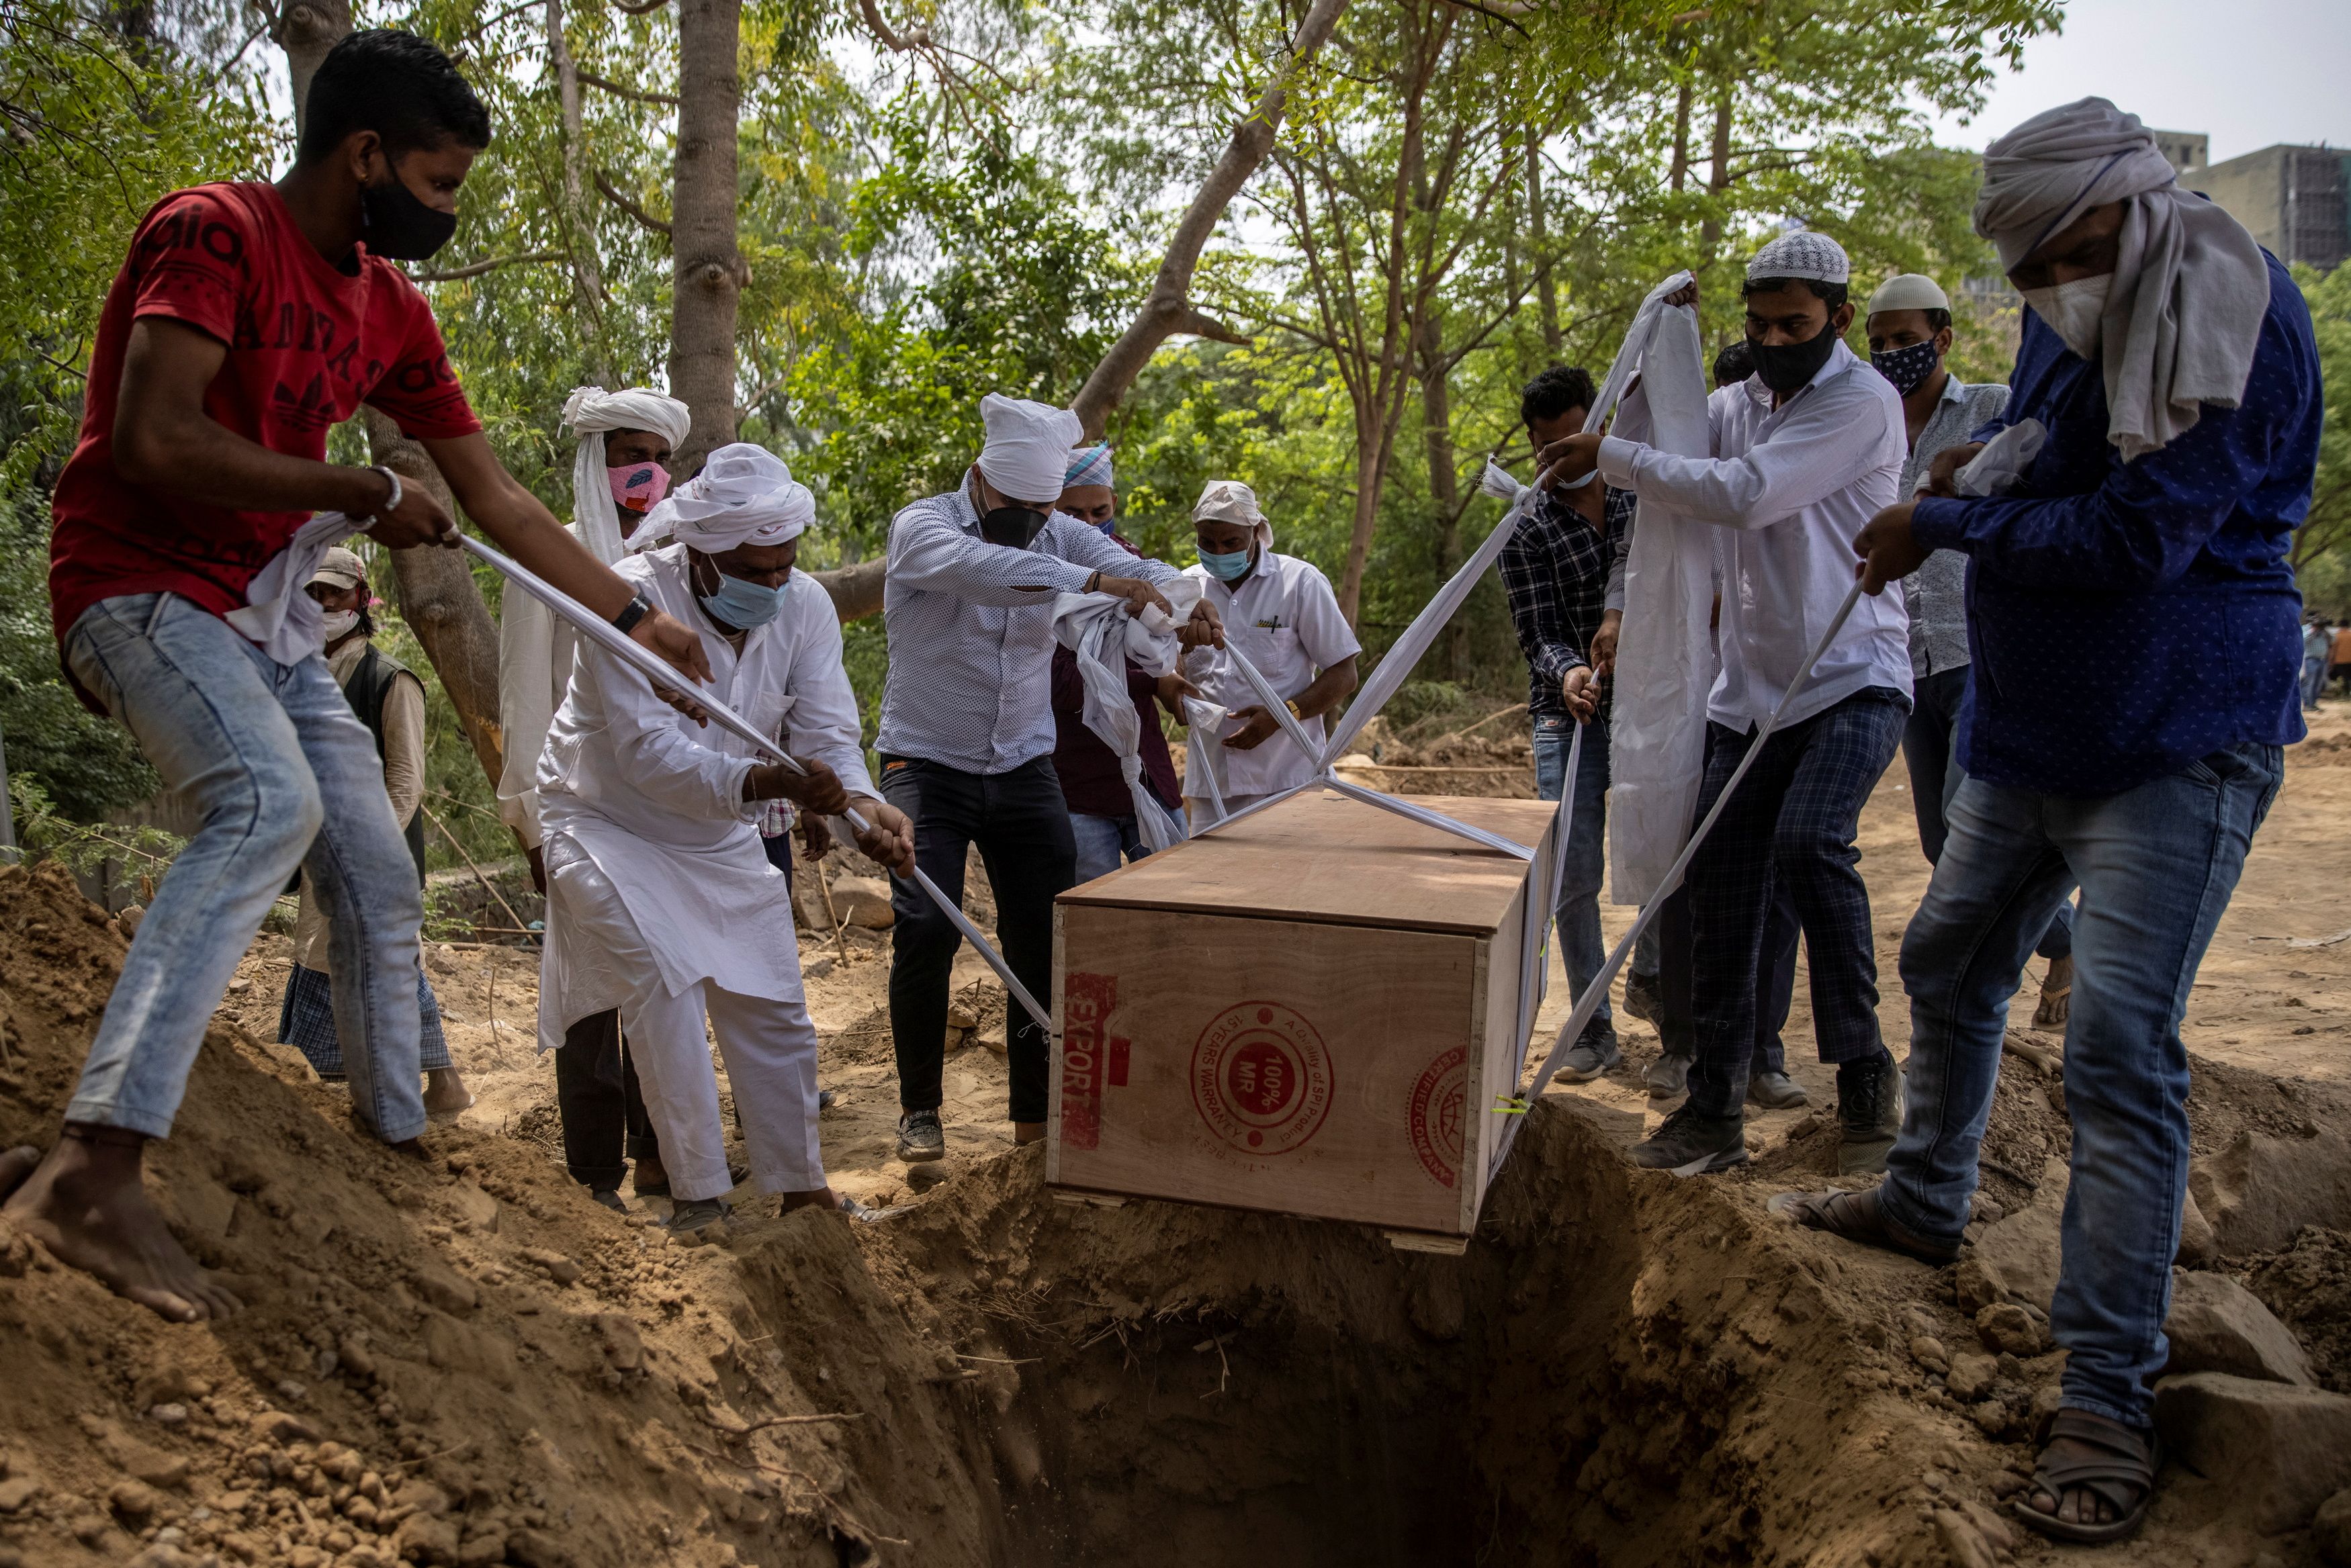 People bury the body of a man at a graveyard in New Delhi